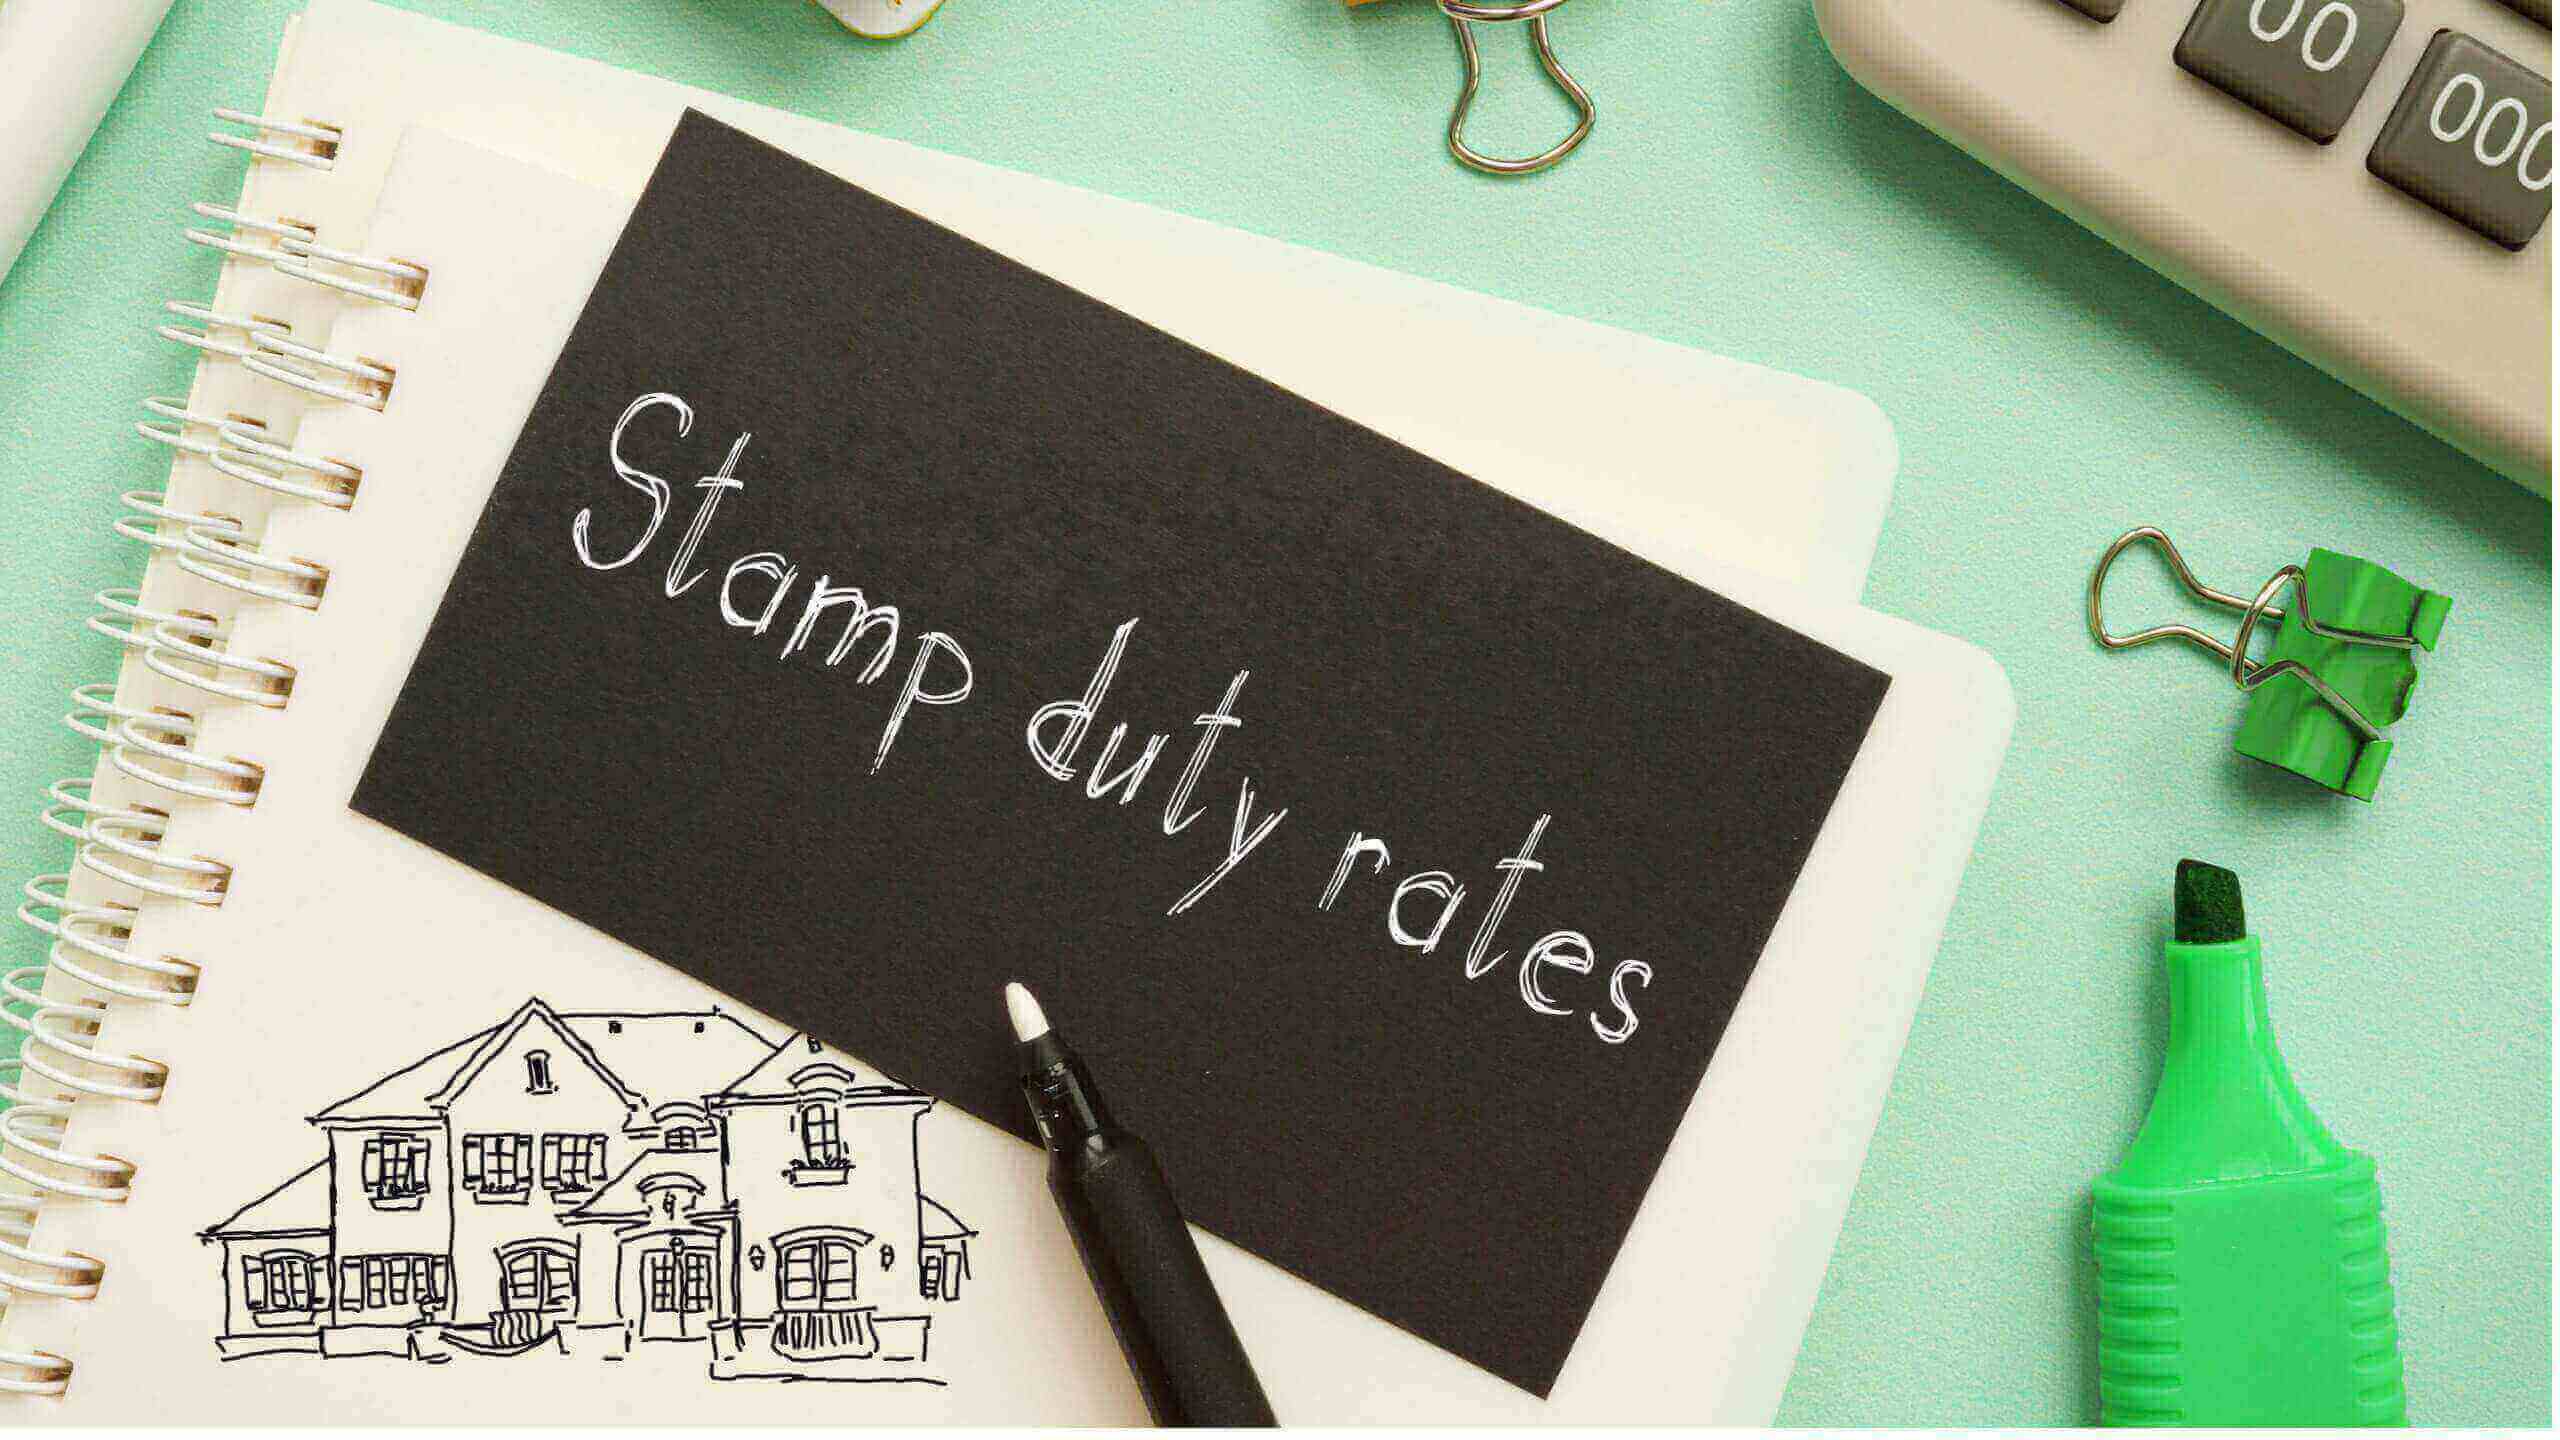 Karnataka’s Real Estate Booster- Stamp Duty Rates cut down by 2%